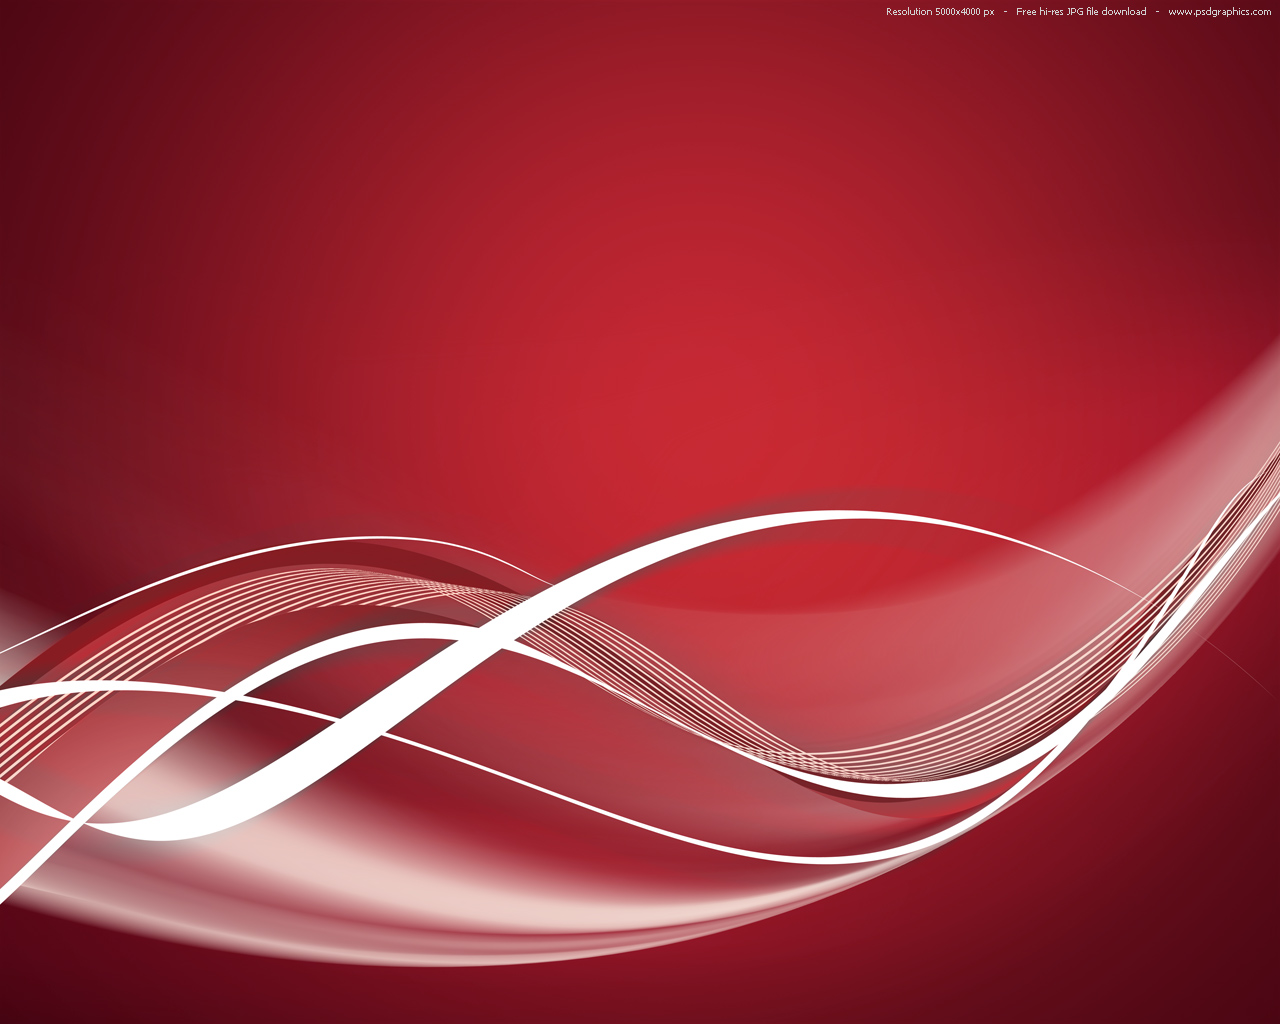 Red and White Wallpaper Backgrounds - WallpaperSafari